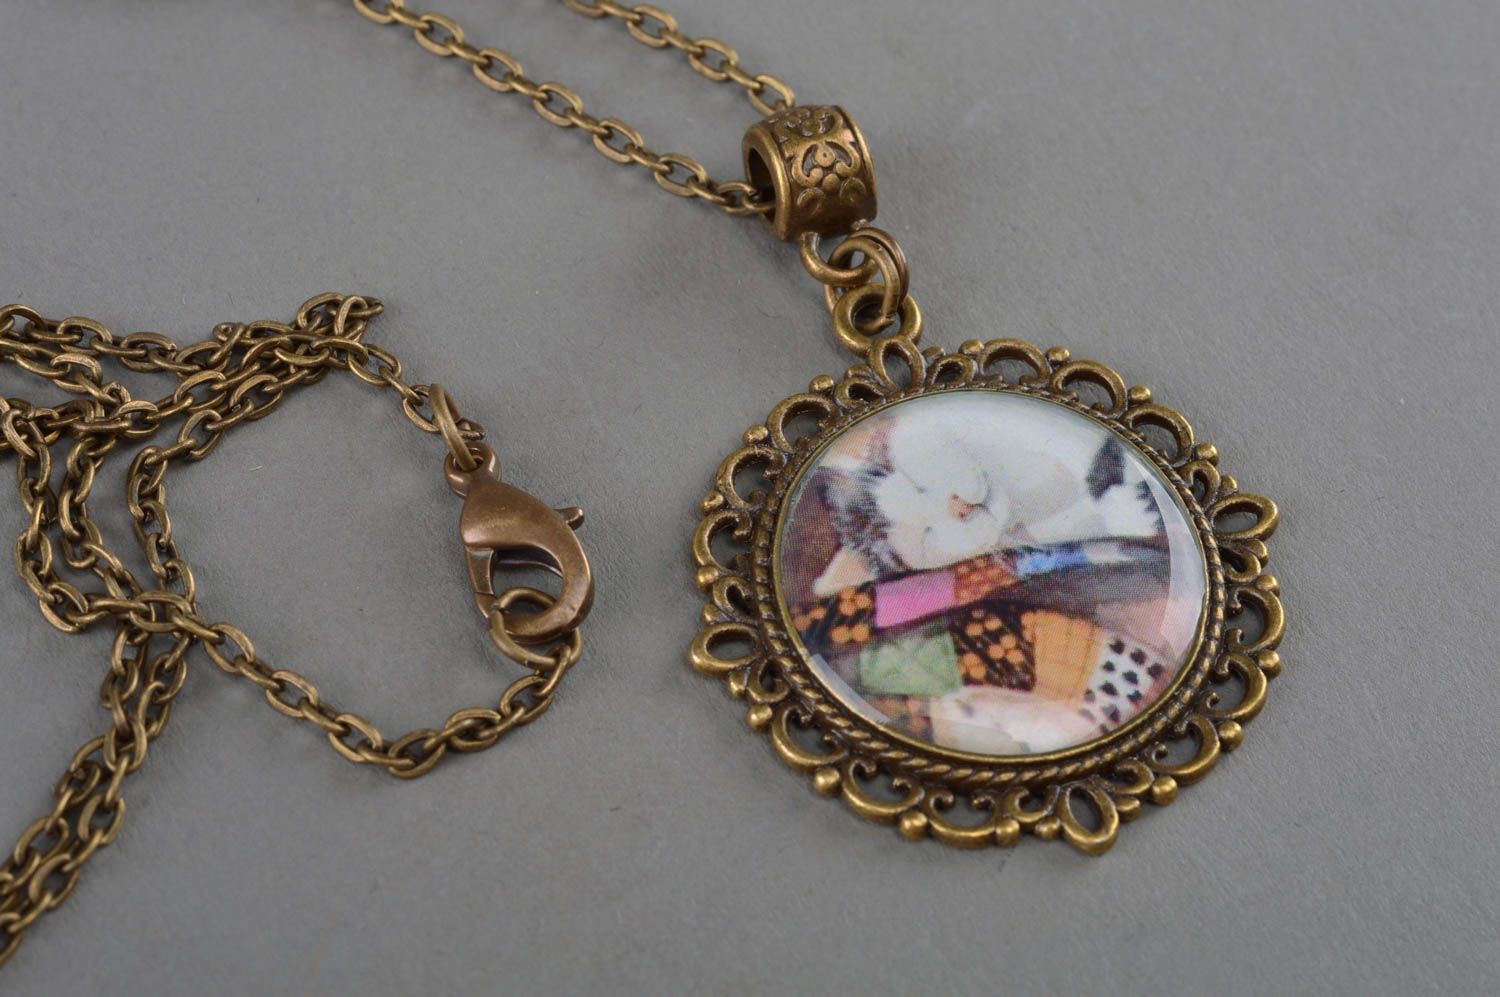 Handmade designer pendant with print made using decoupage technique on long chain photo 2